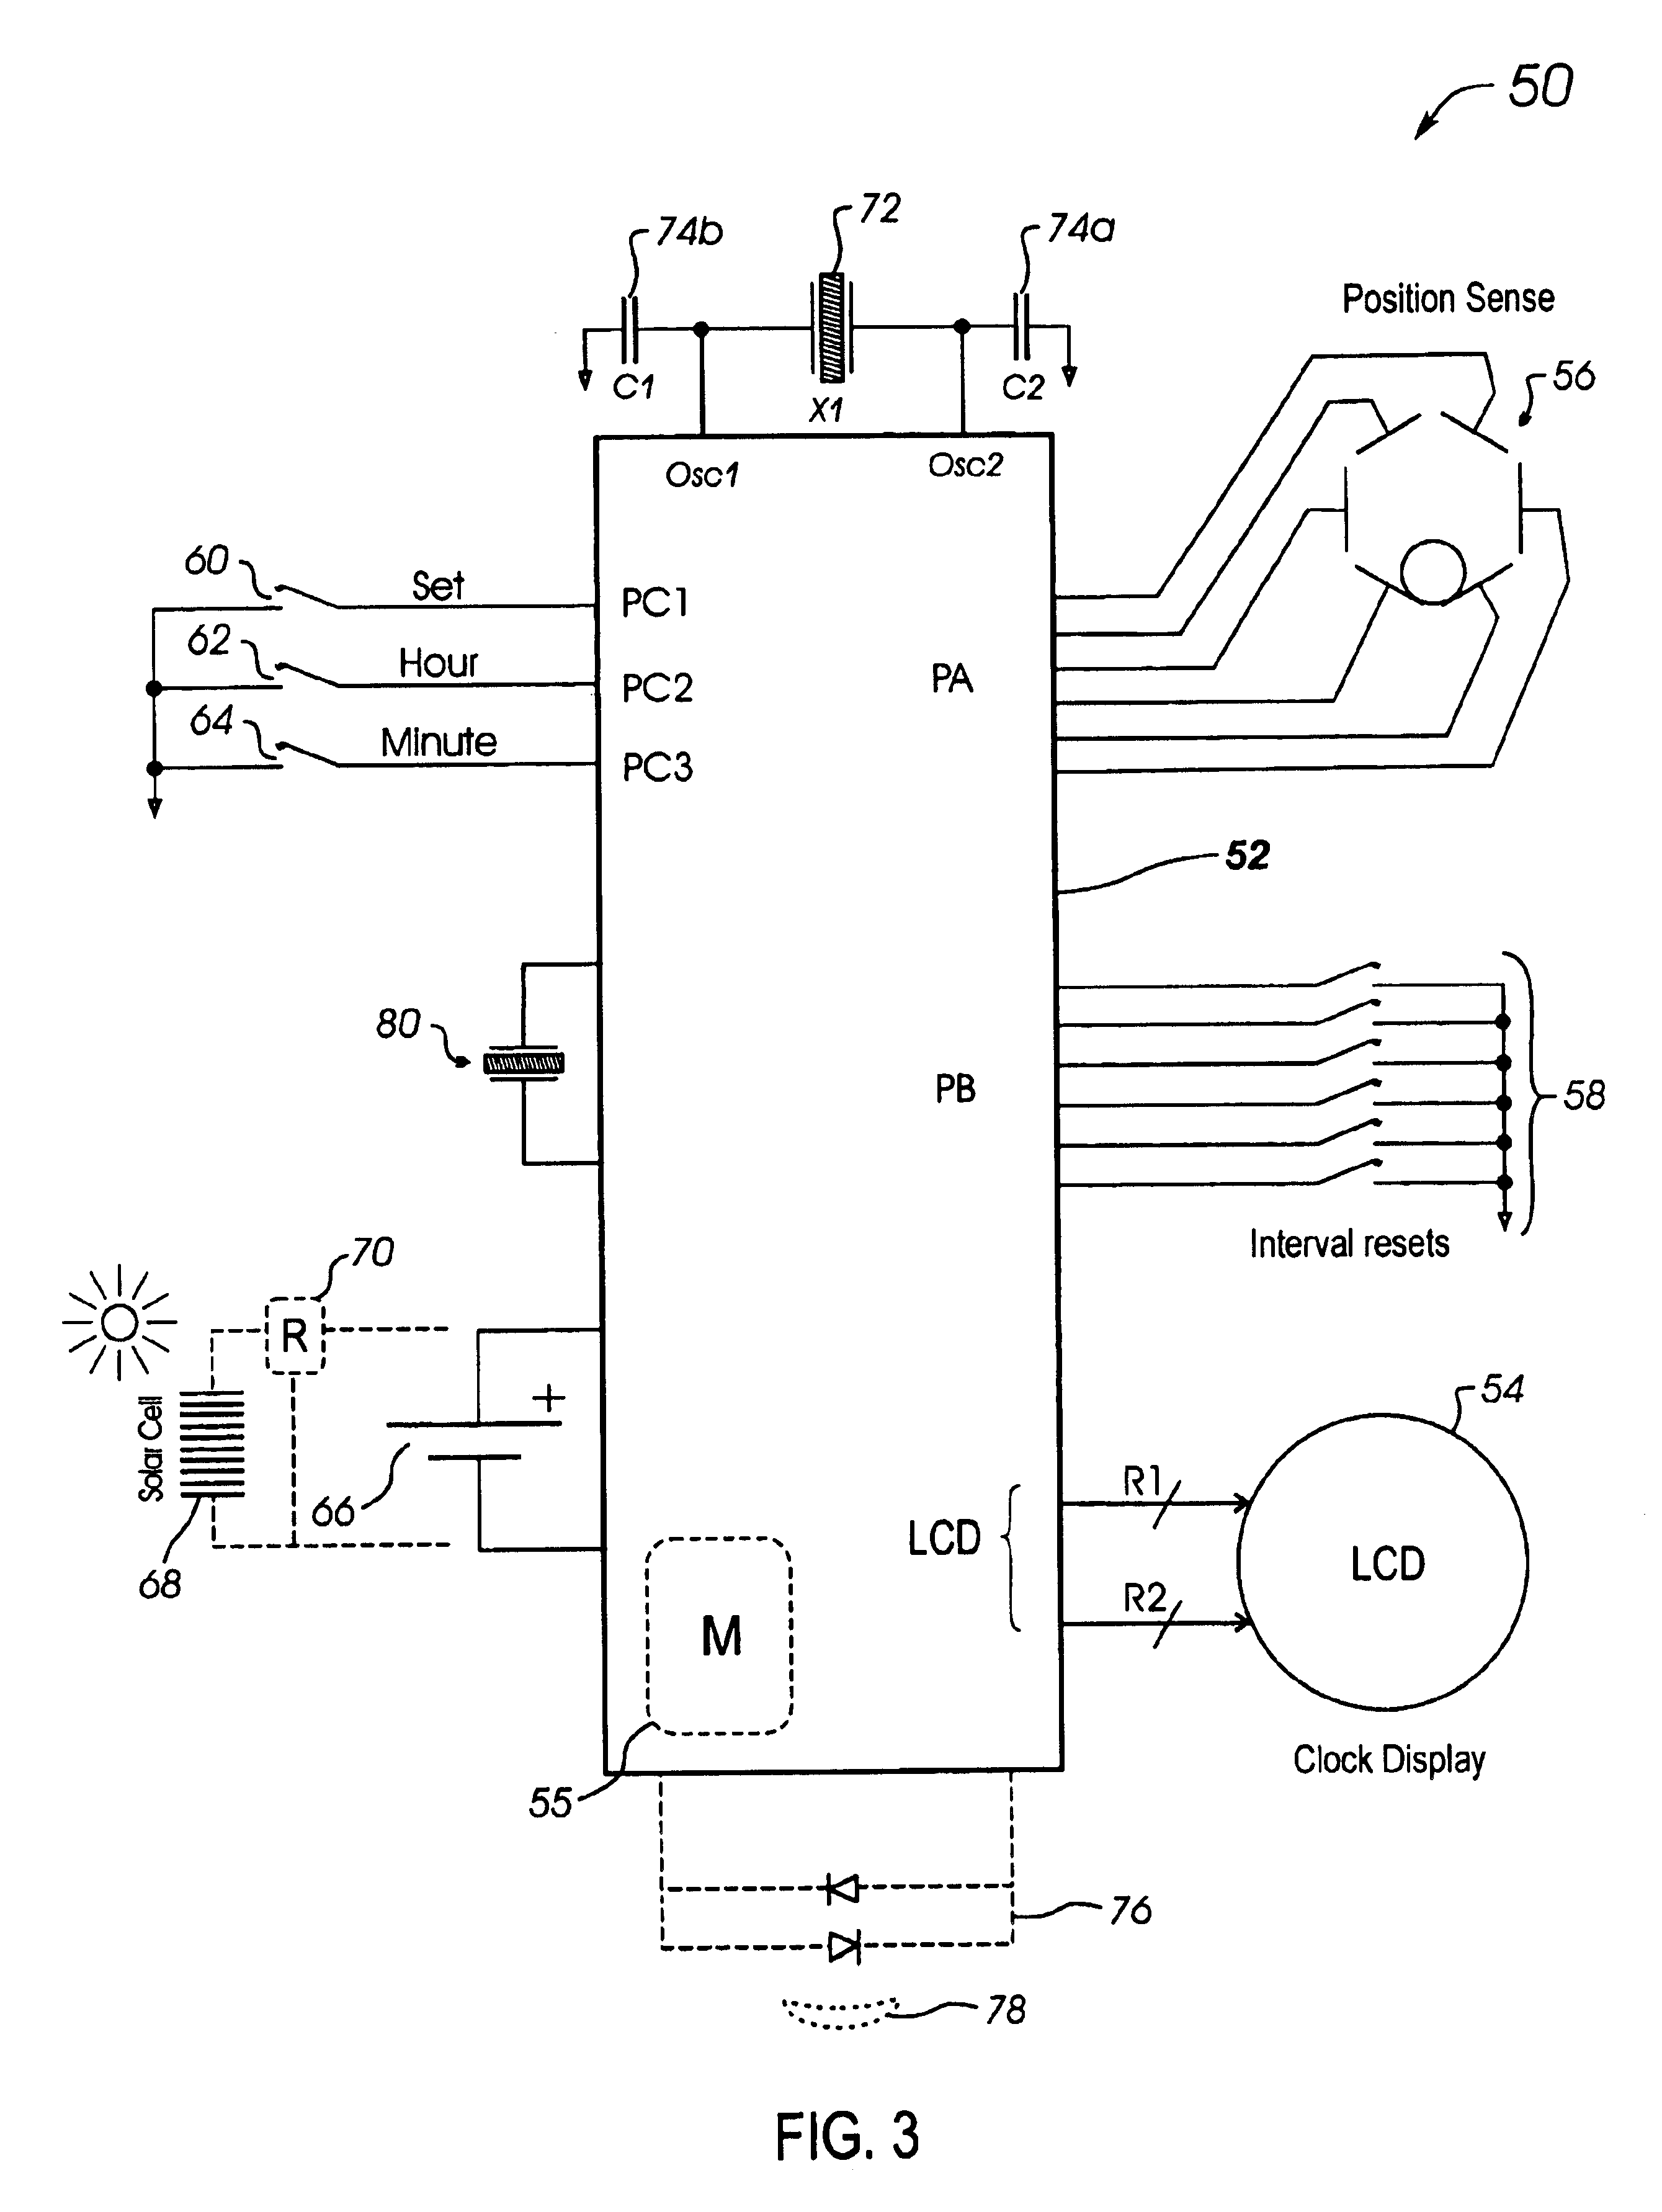 Apparatus and methods of providing enhanced control for consumers